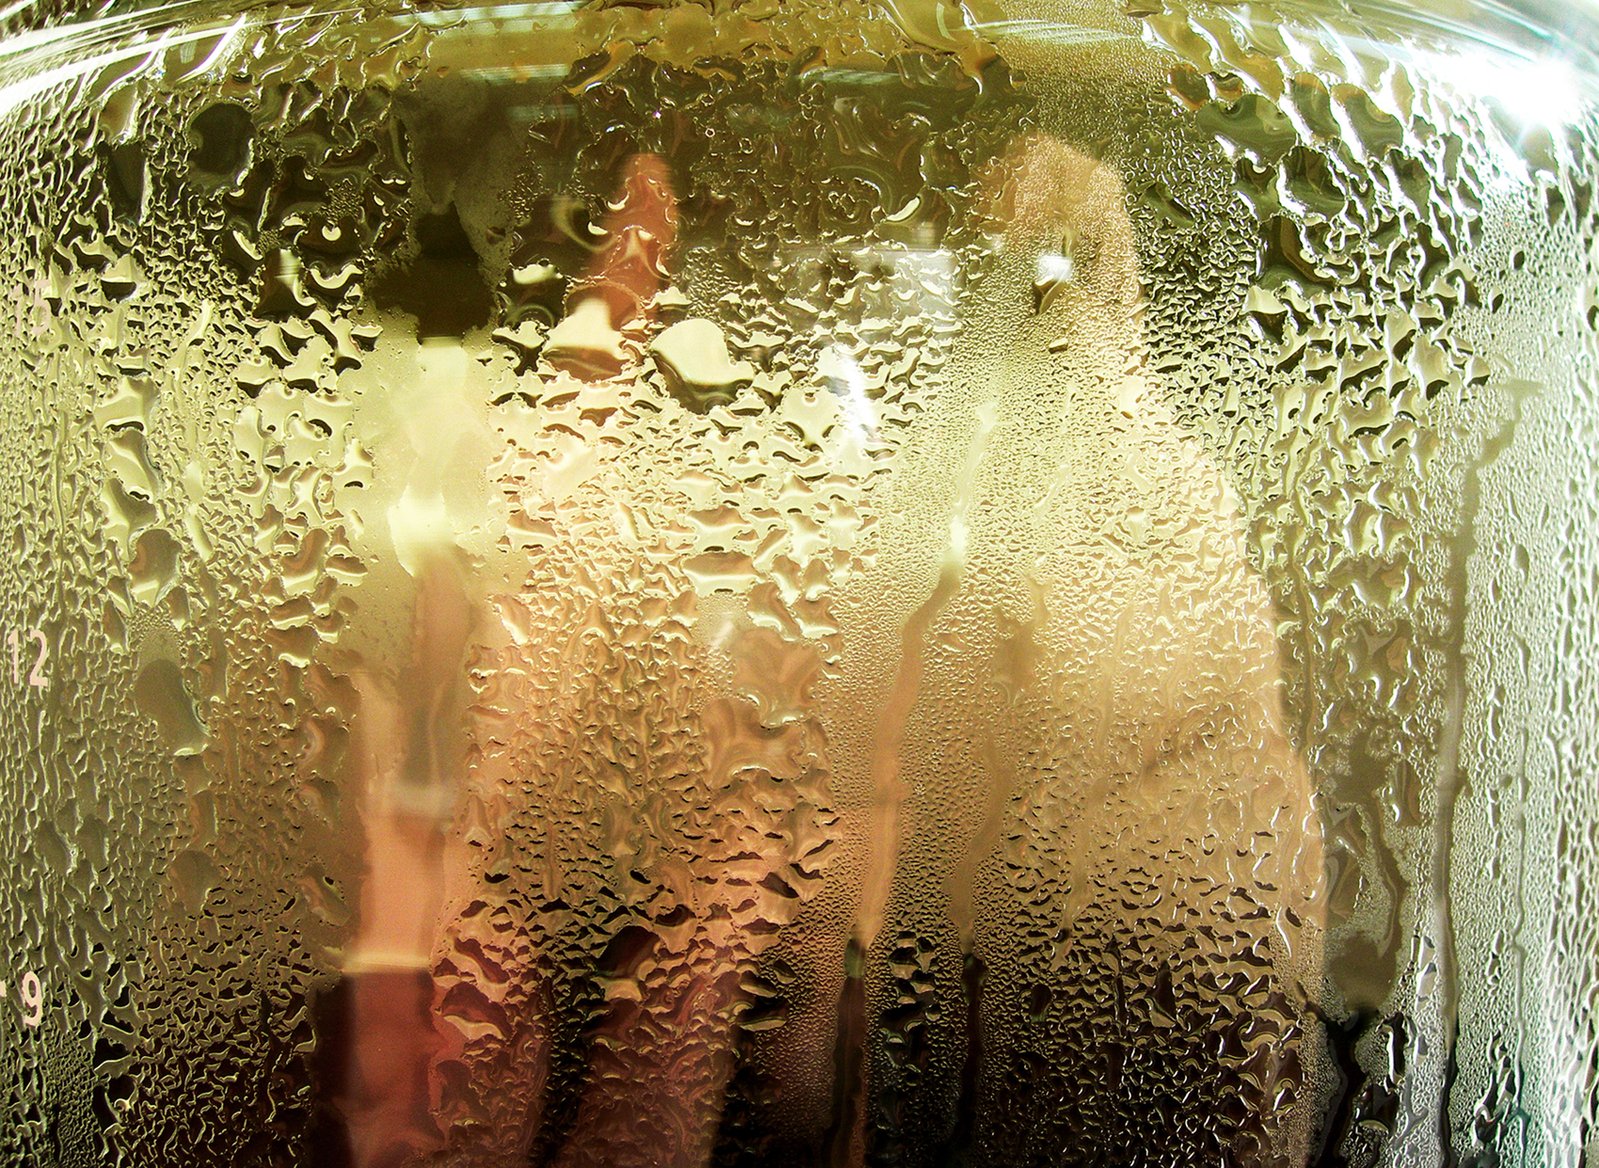 the bottom part of a large glass vase filled with water